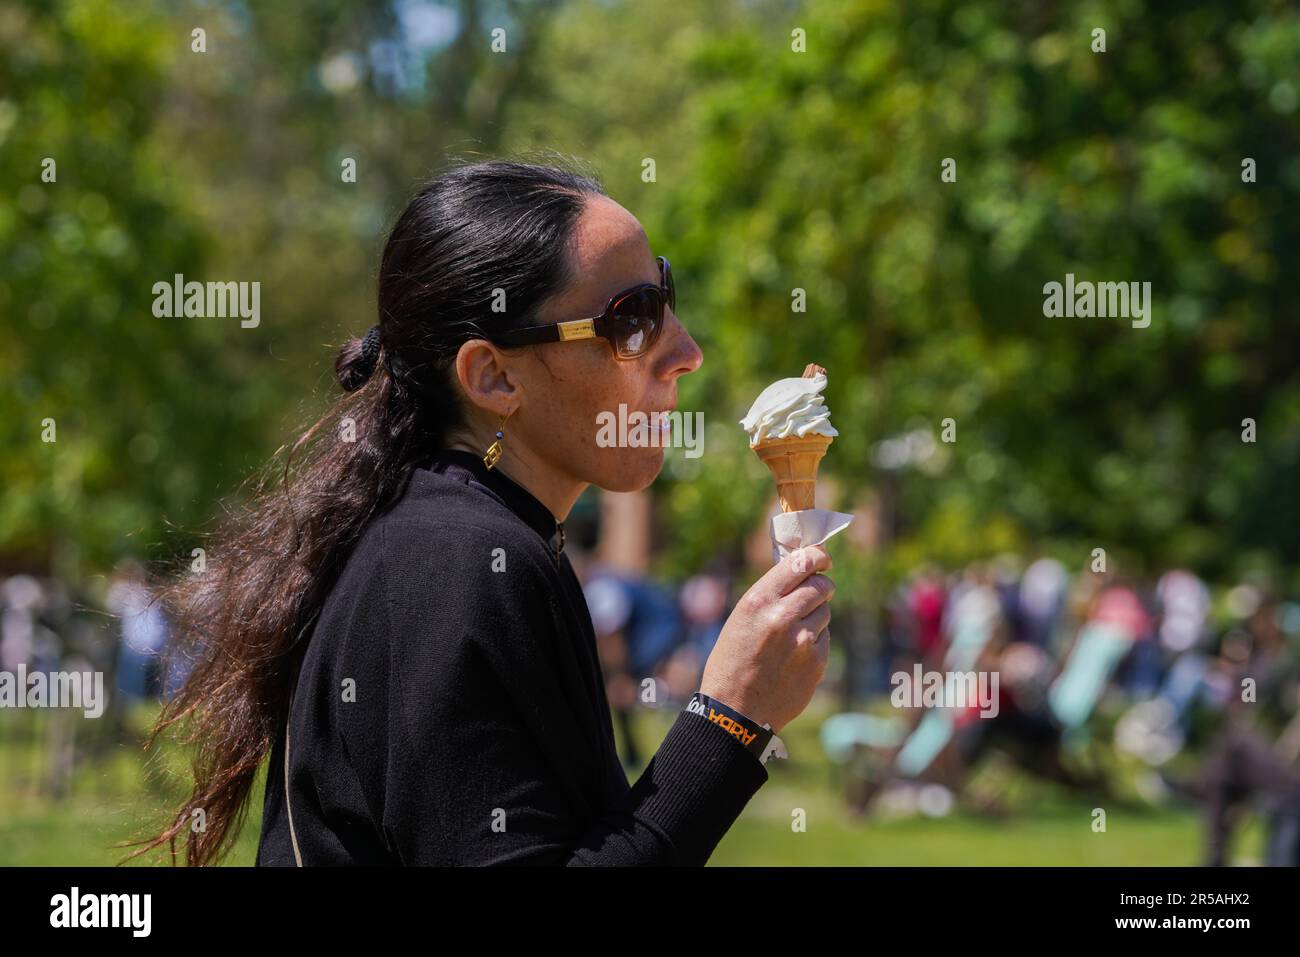 London UK. 2 June 2023 .A woman enjoys an icecream on a sunny day in Saint James Park London. The Met Office forecast warmer temperatures as the country enters the official summer season.Credit: amer ghazzal/Alamy Live News Stock Photo